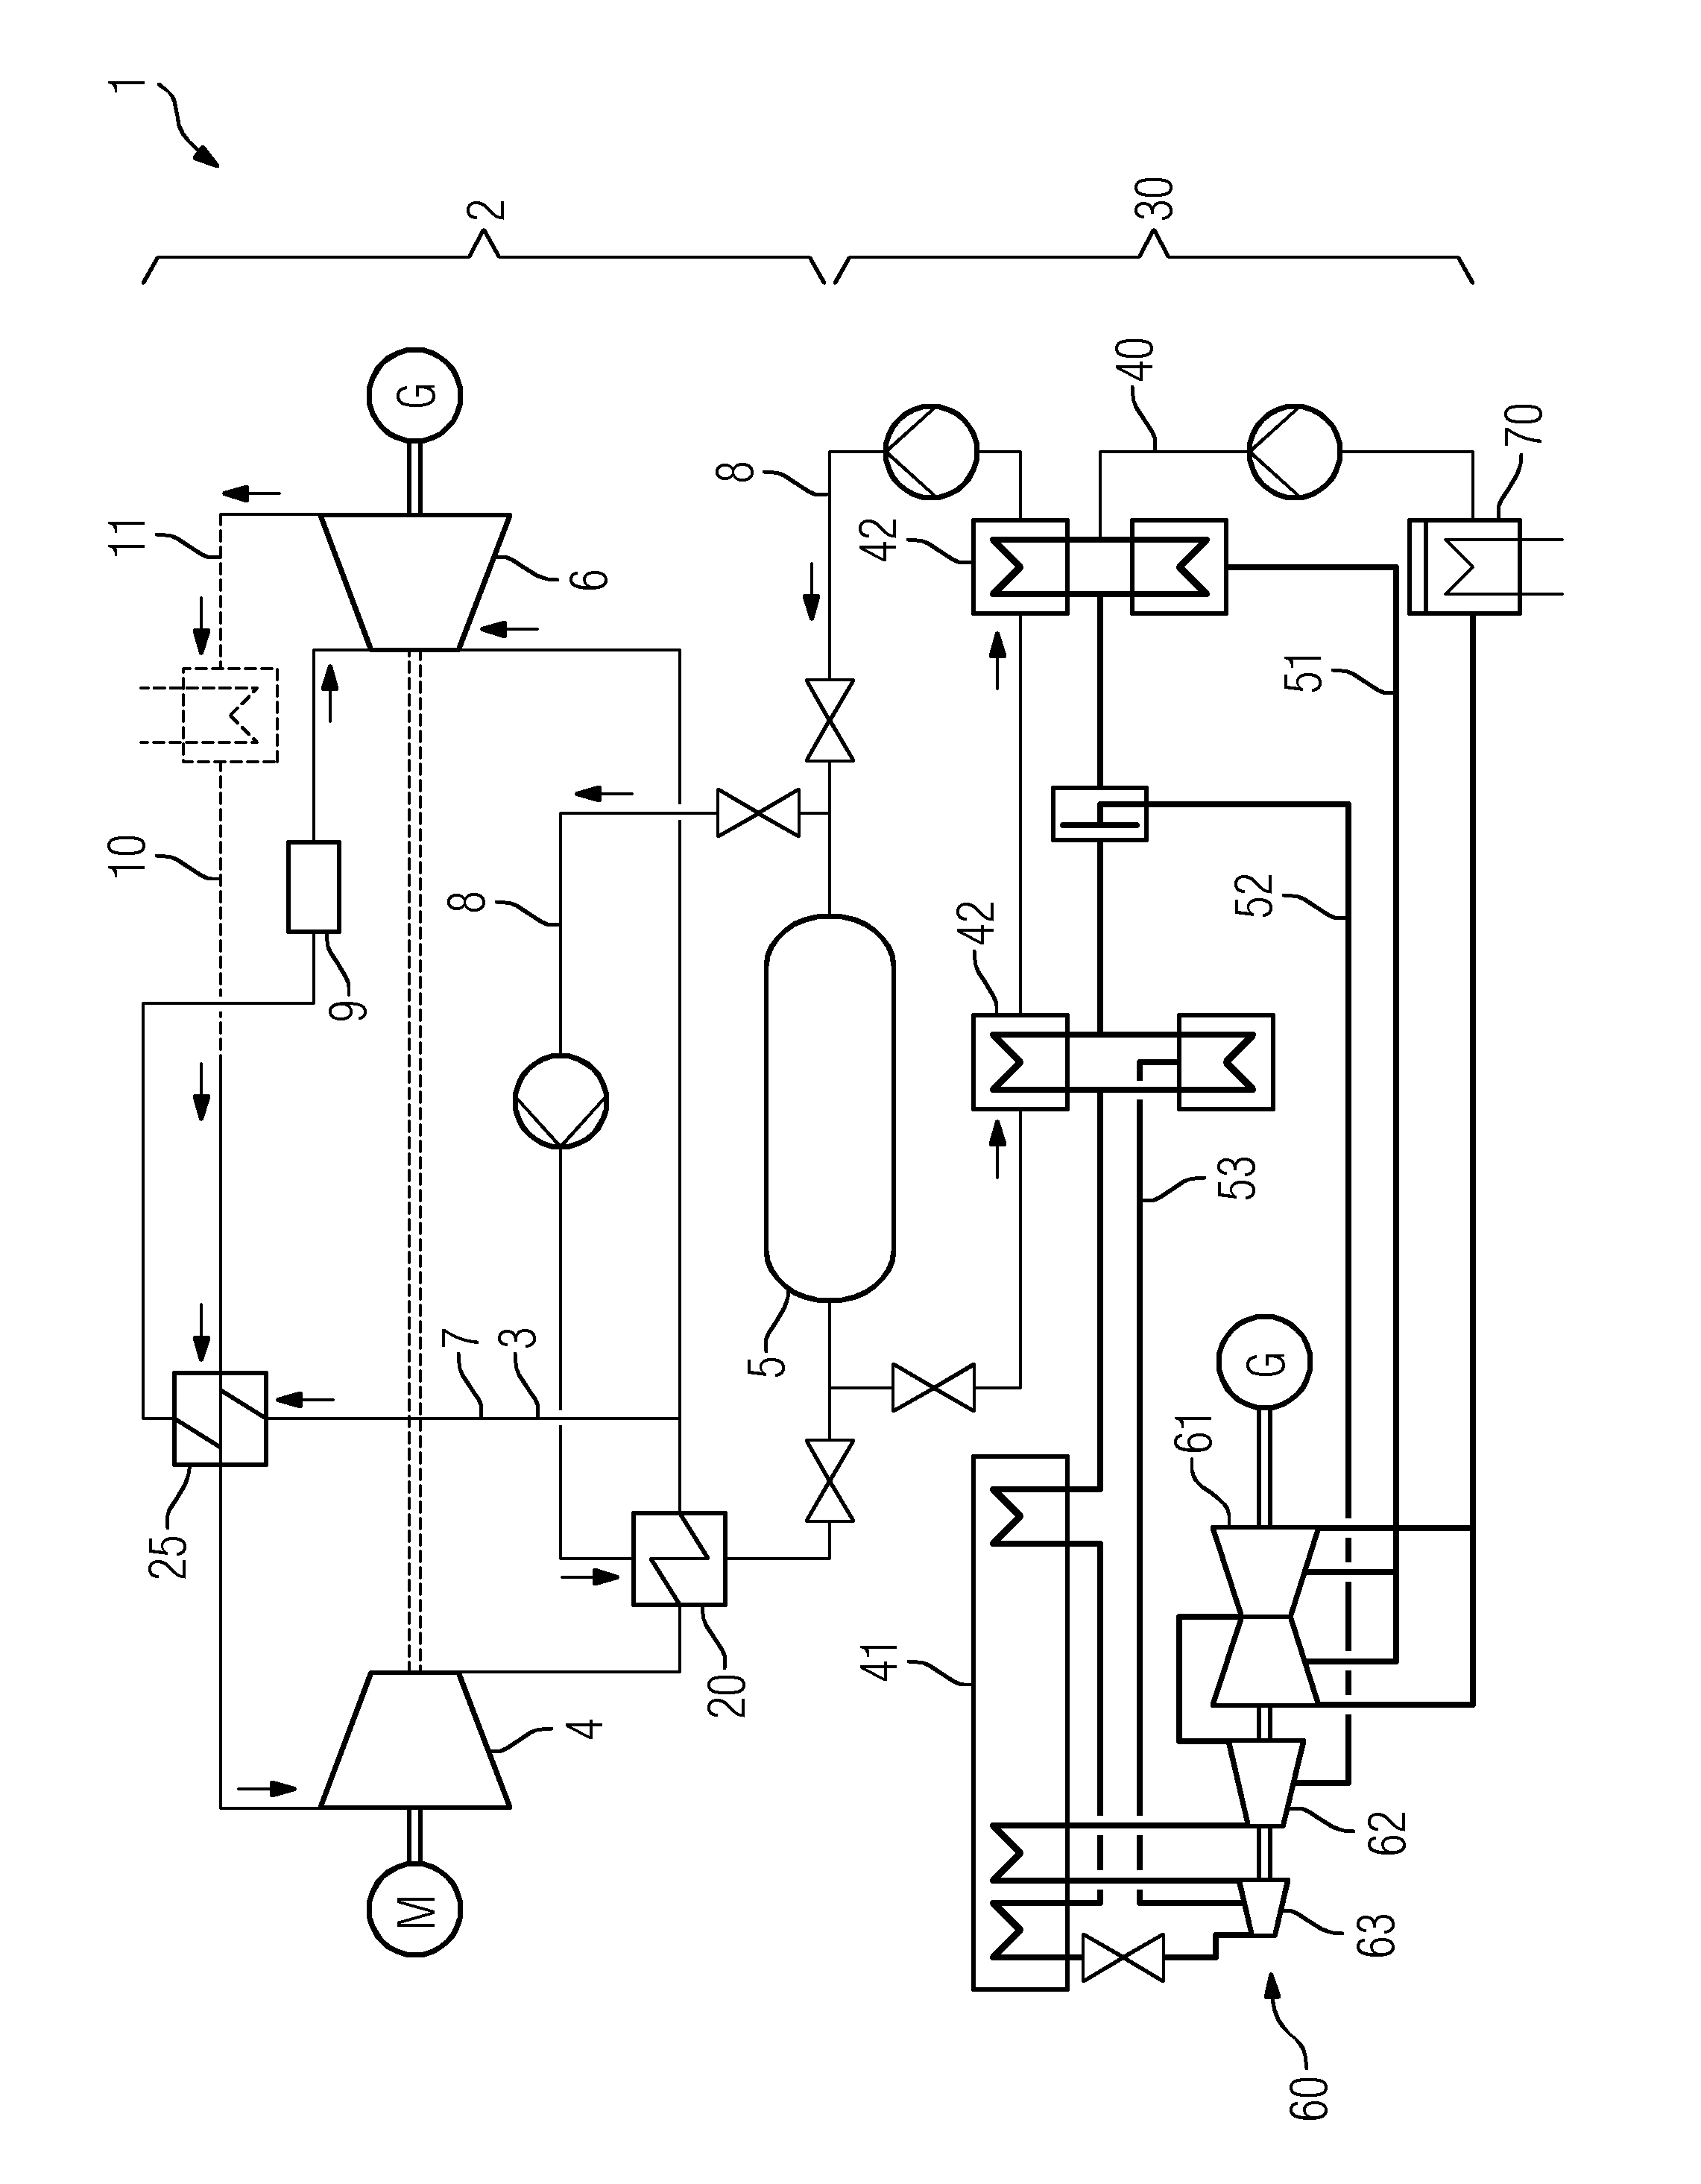 Energy storage apparatus for the preheating of feed water